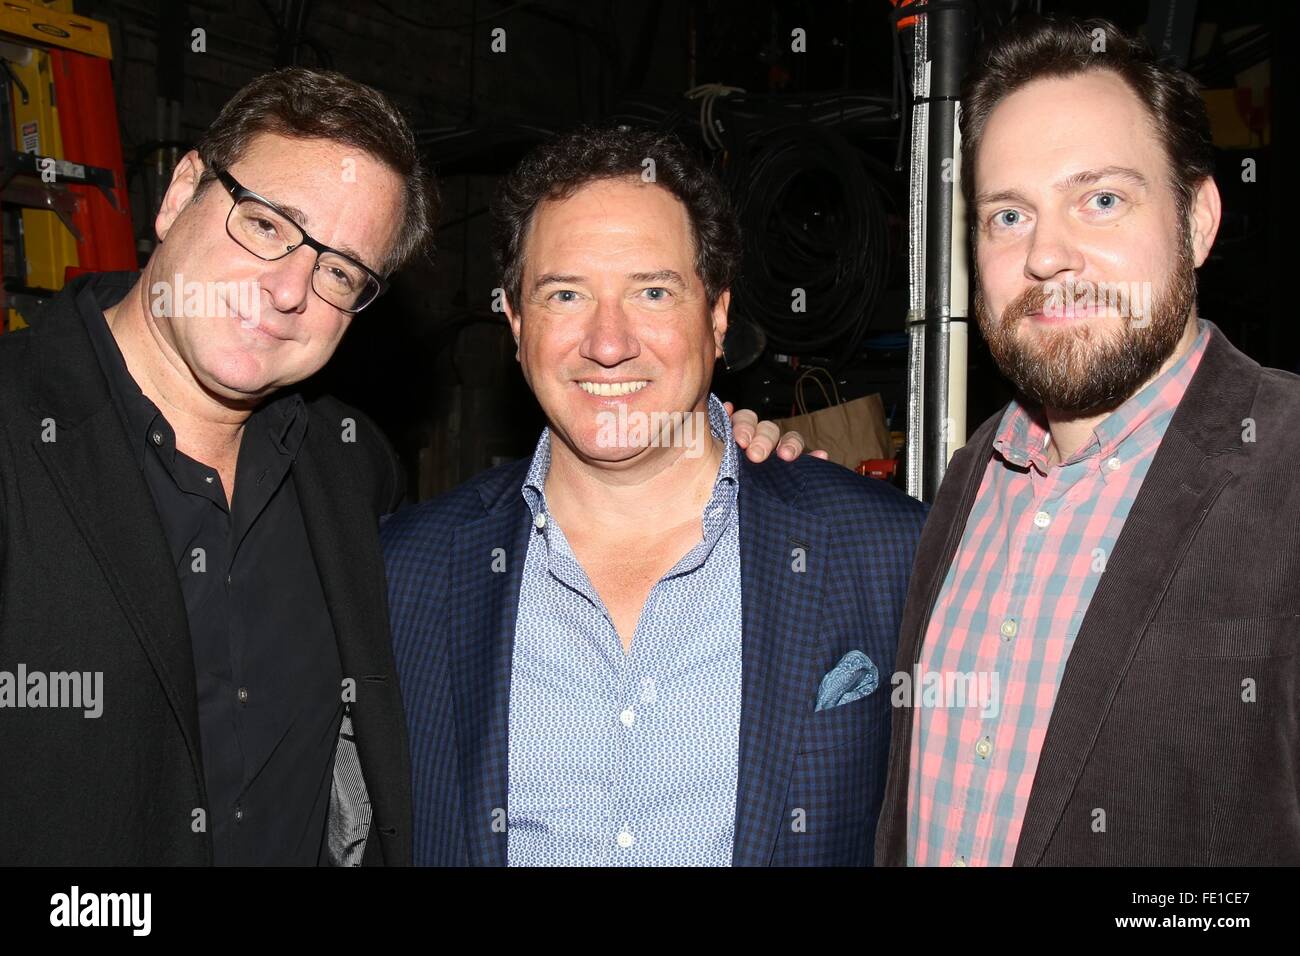 Closing night of the Broadway play Hand To God at the Booth Theatre - Backstage.  Featuring: Bob Saget, Kevin McCollum, Moritz Von Stuelpnagel Where: New York, New York, United States When: 03 Jan 2016 Stock Photo